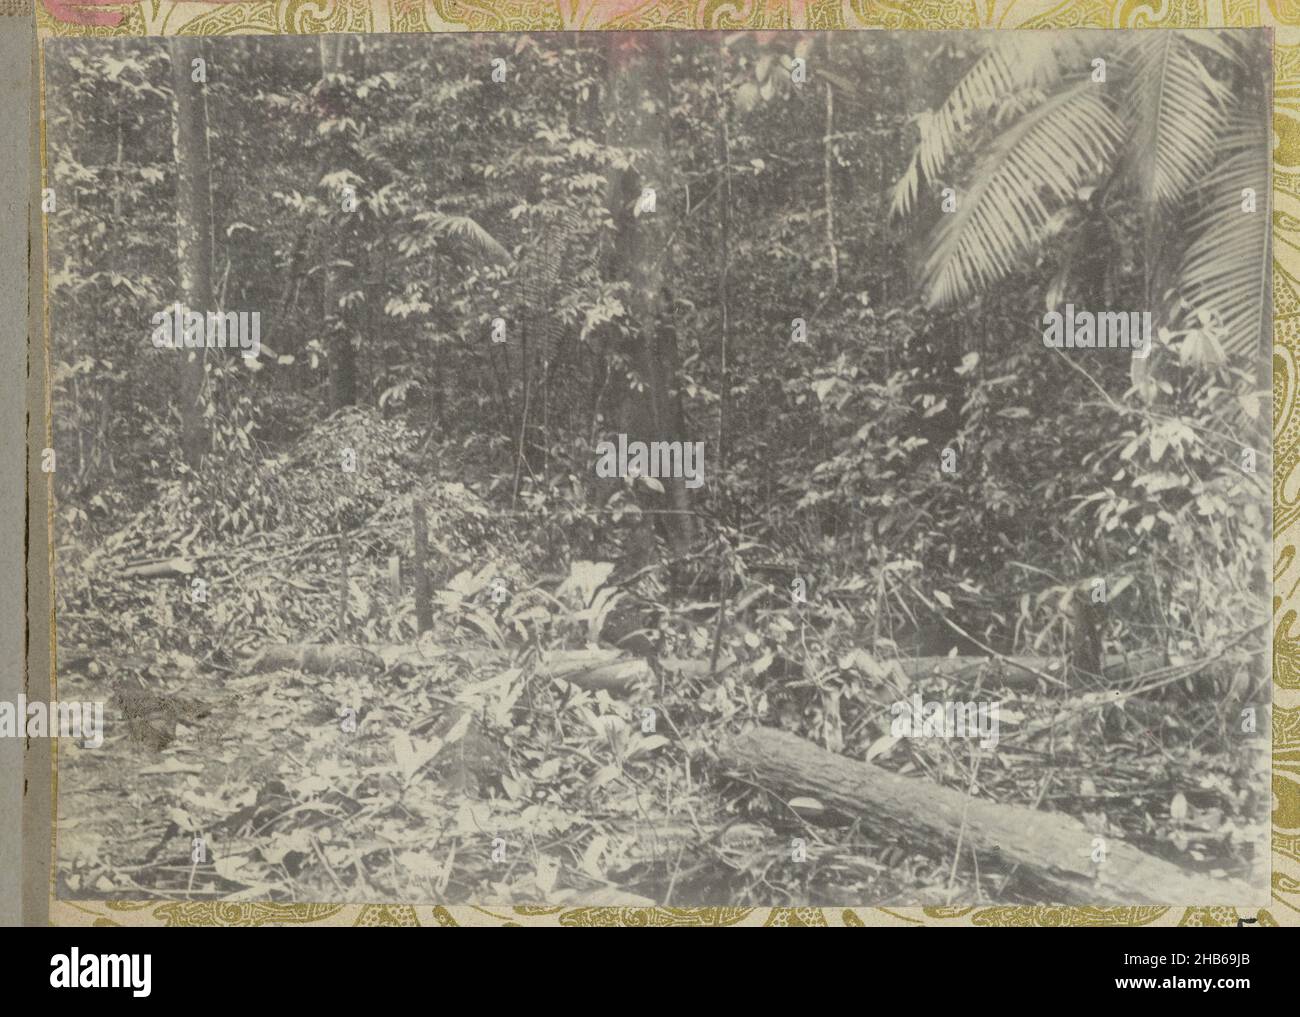 In the primeval forest, Trees and plants in the Surinamese primeval forest. Part of the photo album Souvenir de Voyage (part 1), about the life of the Doijer family in and around the plantation Ma Retraite in Suriname in the years 1906-1913., Hendrik Doijer (attributed to), Suriname, 1906 - 1913, photographic support, gelatin silver print, height 80 mm × width 112 mm Stock Photo